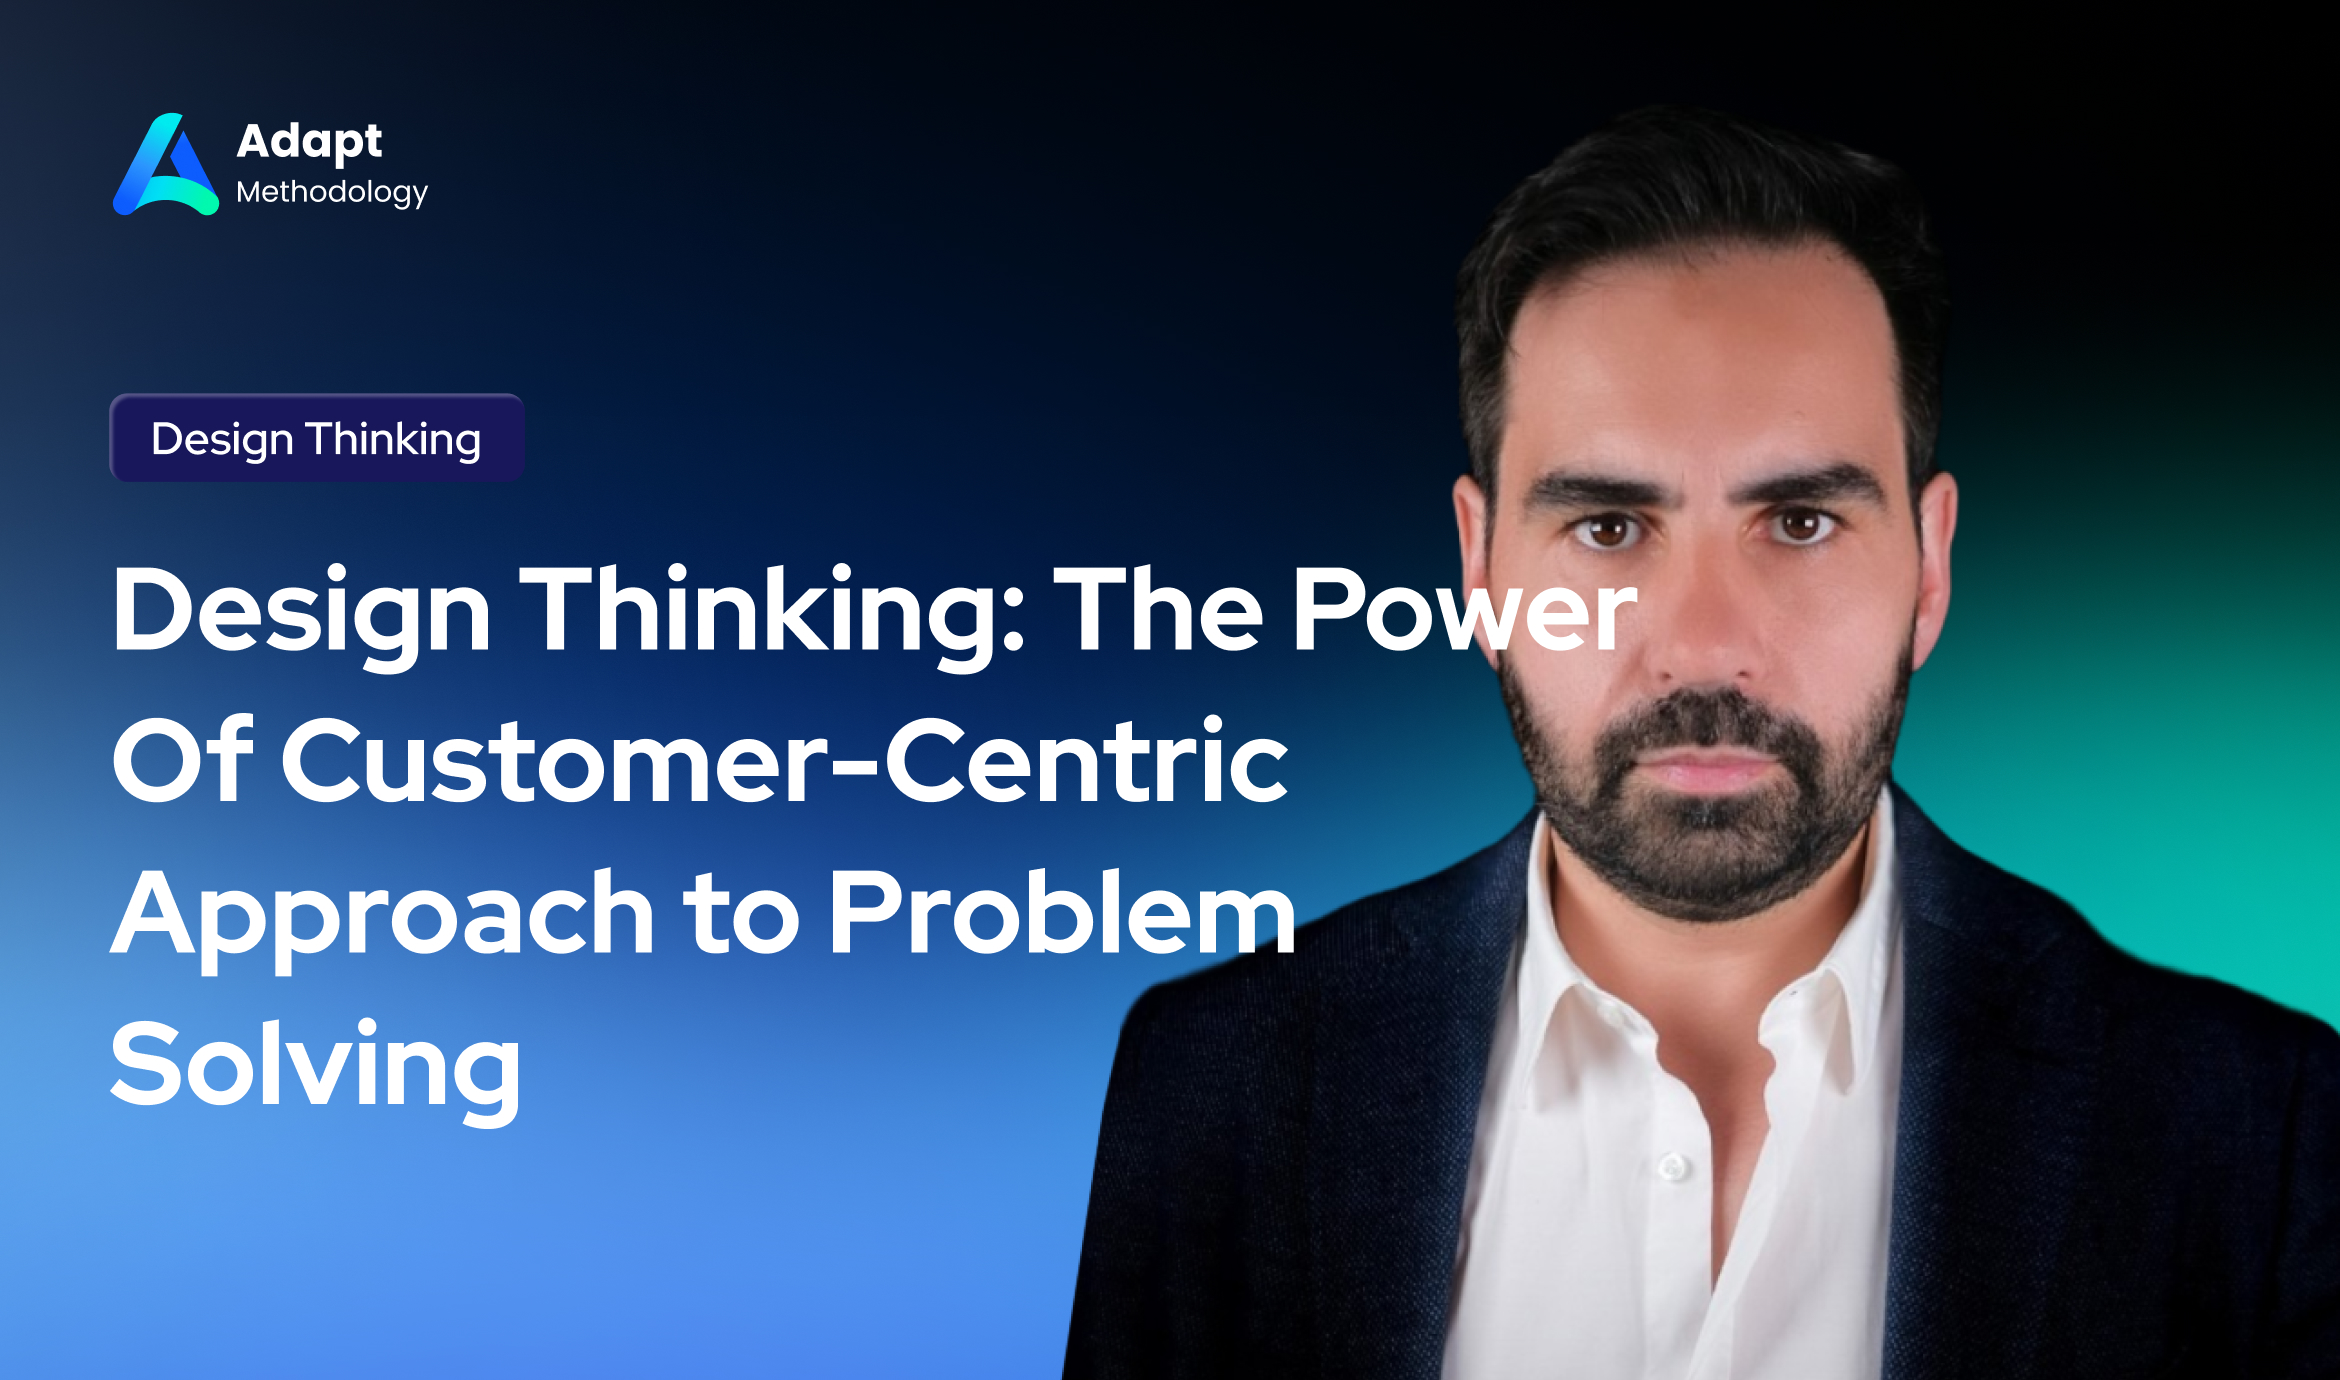 Design Thinking The Power Of Customer-Centric Approach to Problem Solving